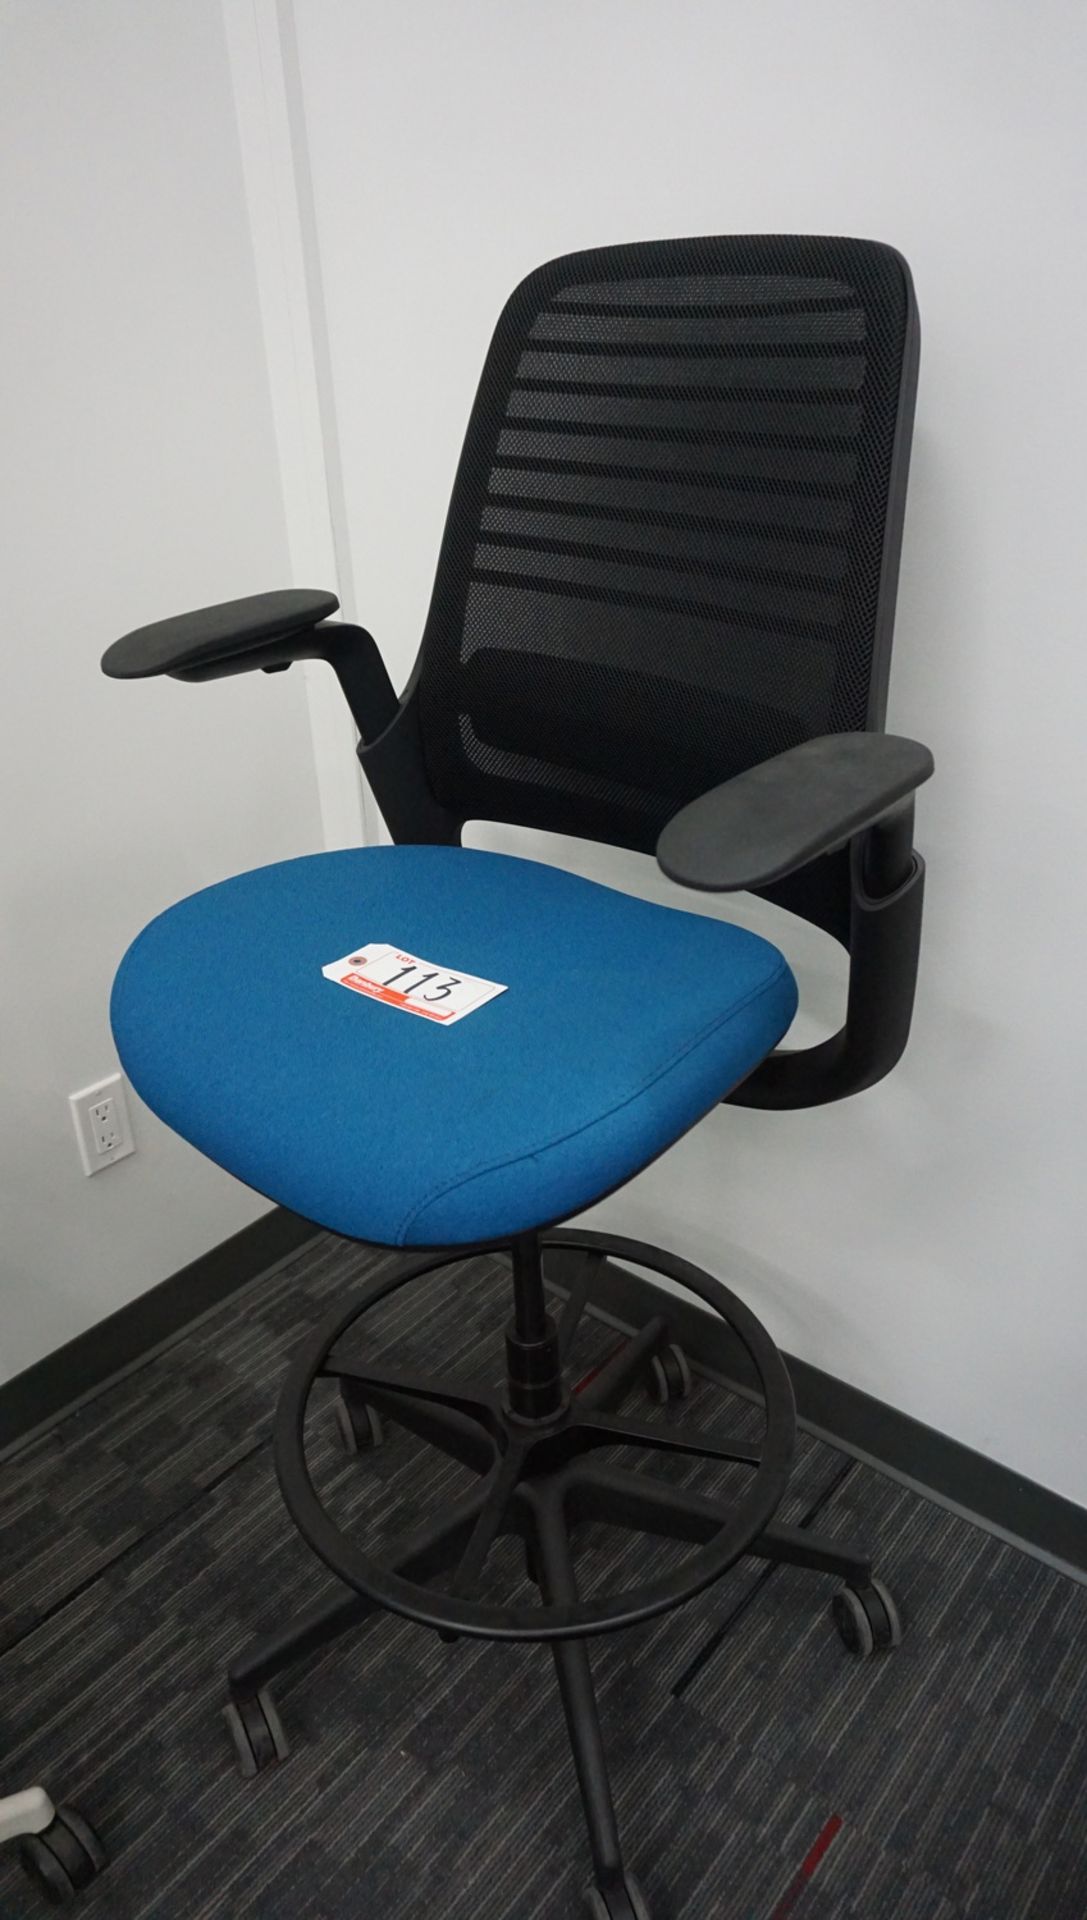 STEELCASE SERIES 1 STOOL W/ BLUE FABRIC SEAT & BLK MESH BACK & LUMBAR SUPPORT (MSRP $1,500)